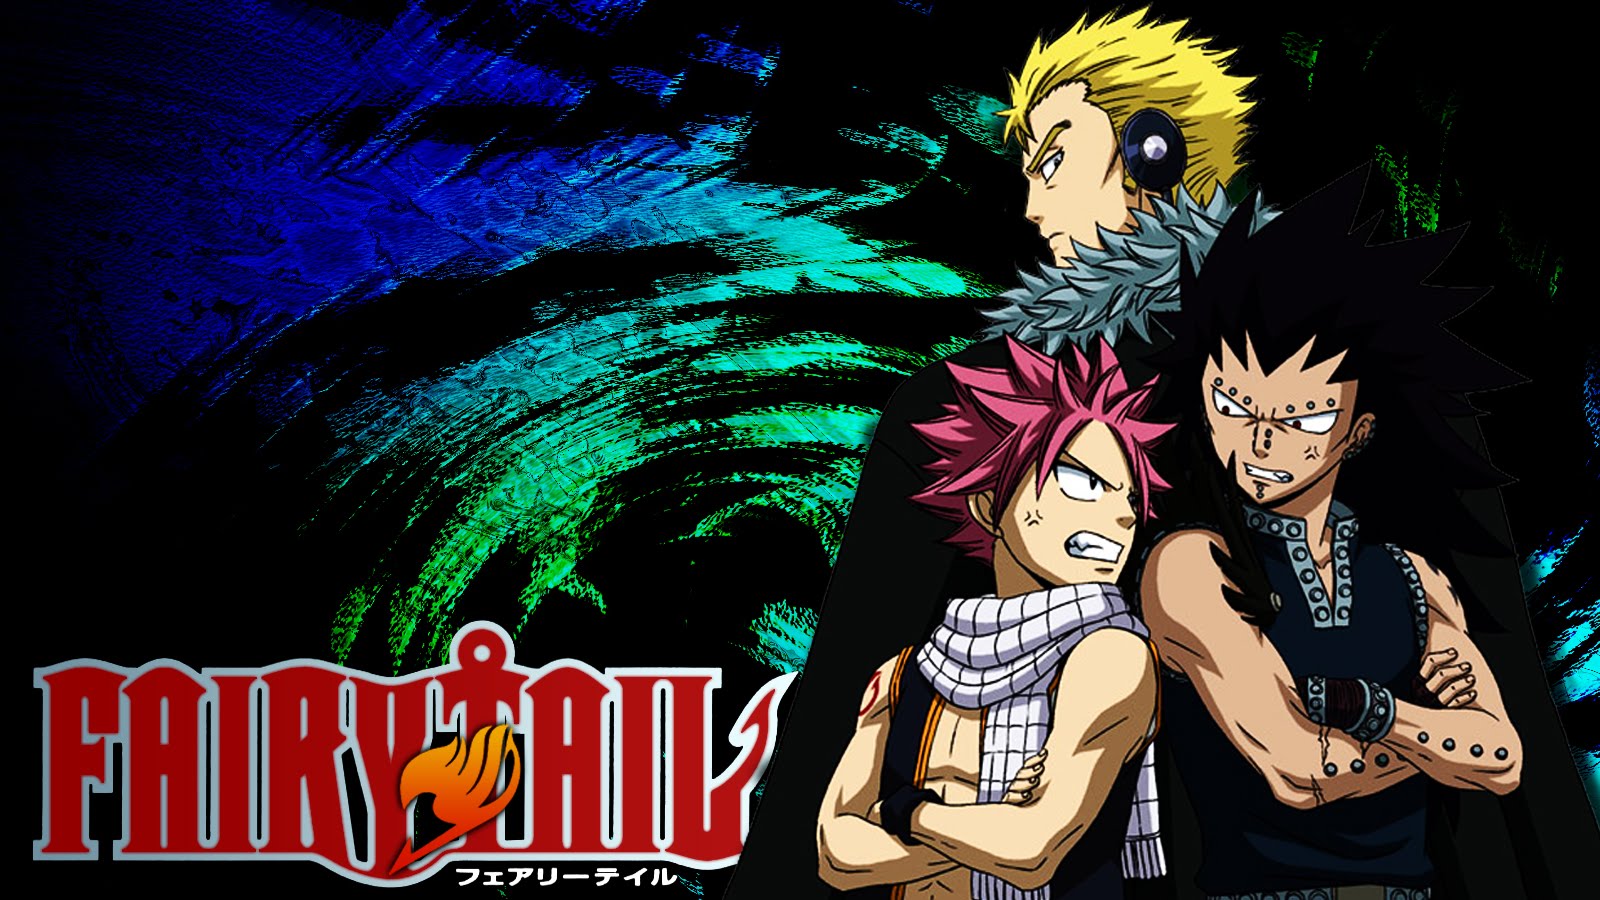 Free Download Wallpaper Laxus Fairy Tail Hd 1600x900 For Your Desktop Mobile Tablet Explore 77 Fairy Tail Wallpaper Hd Fairy Tail Wallpaper Fairy Tail Logo Wallpaper Fairy Background Wallpaper